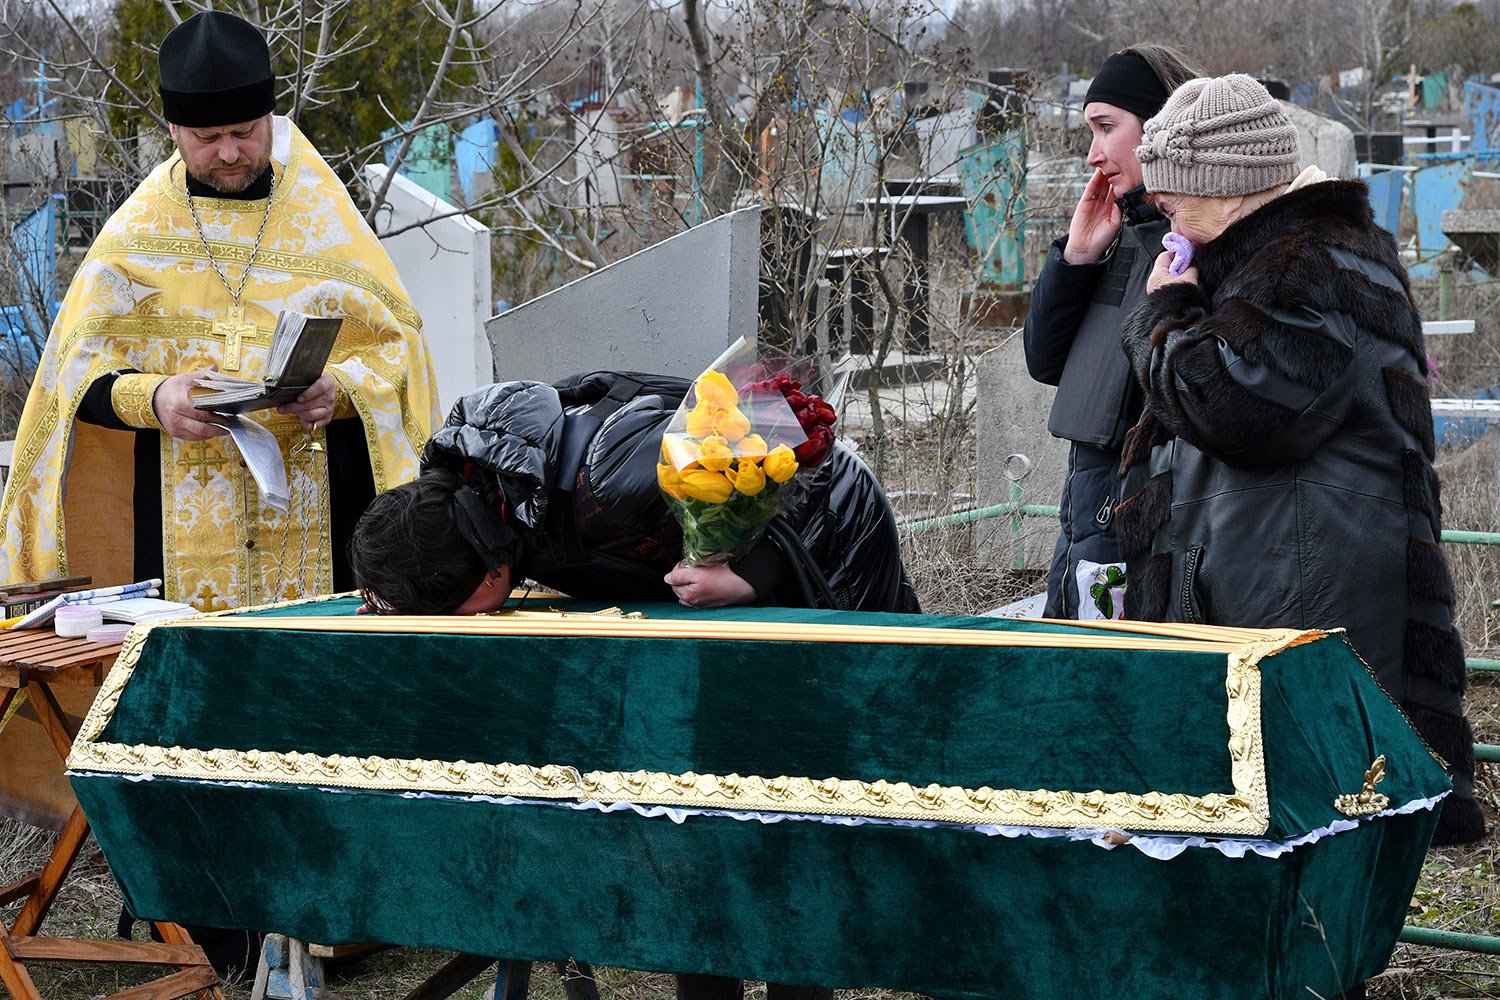  Relatives and friends stand near the coffin of Ukrainian serviceman Anatoly German during a funeral ceremony in Kramatorsk, Ukraine, Tuesday, April 5, 2022. Anatoly German was killed during fightings between Russian and Ukrainian forces near the cit